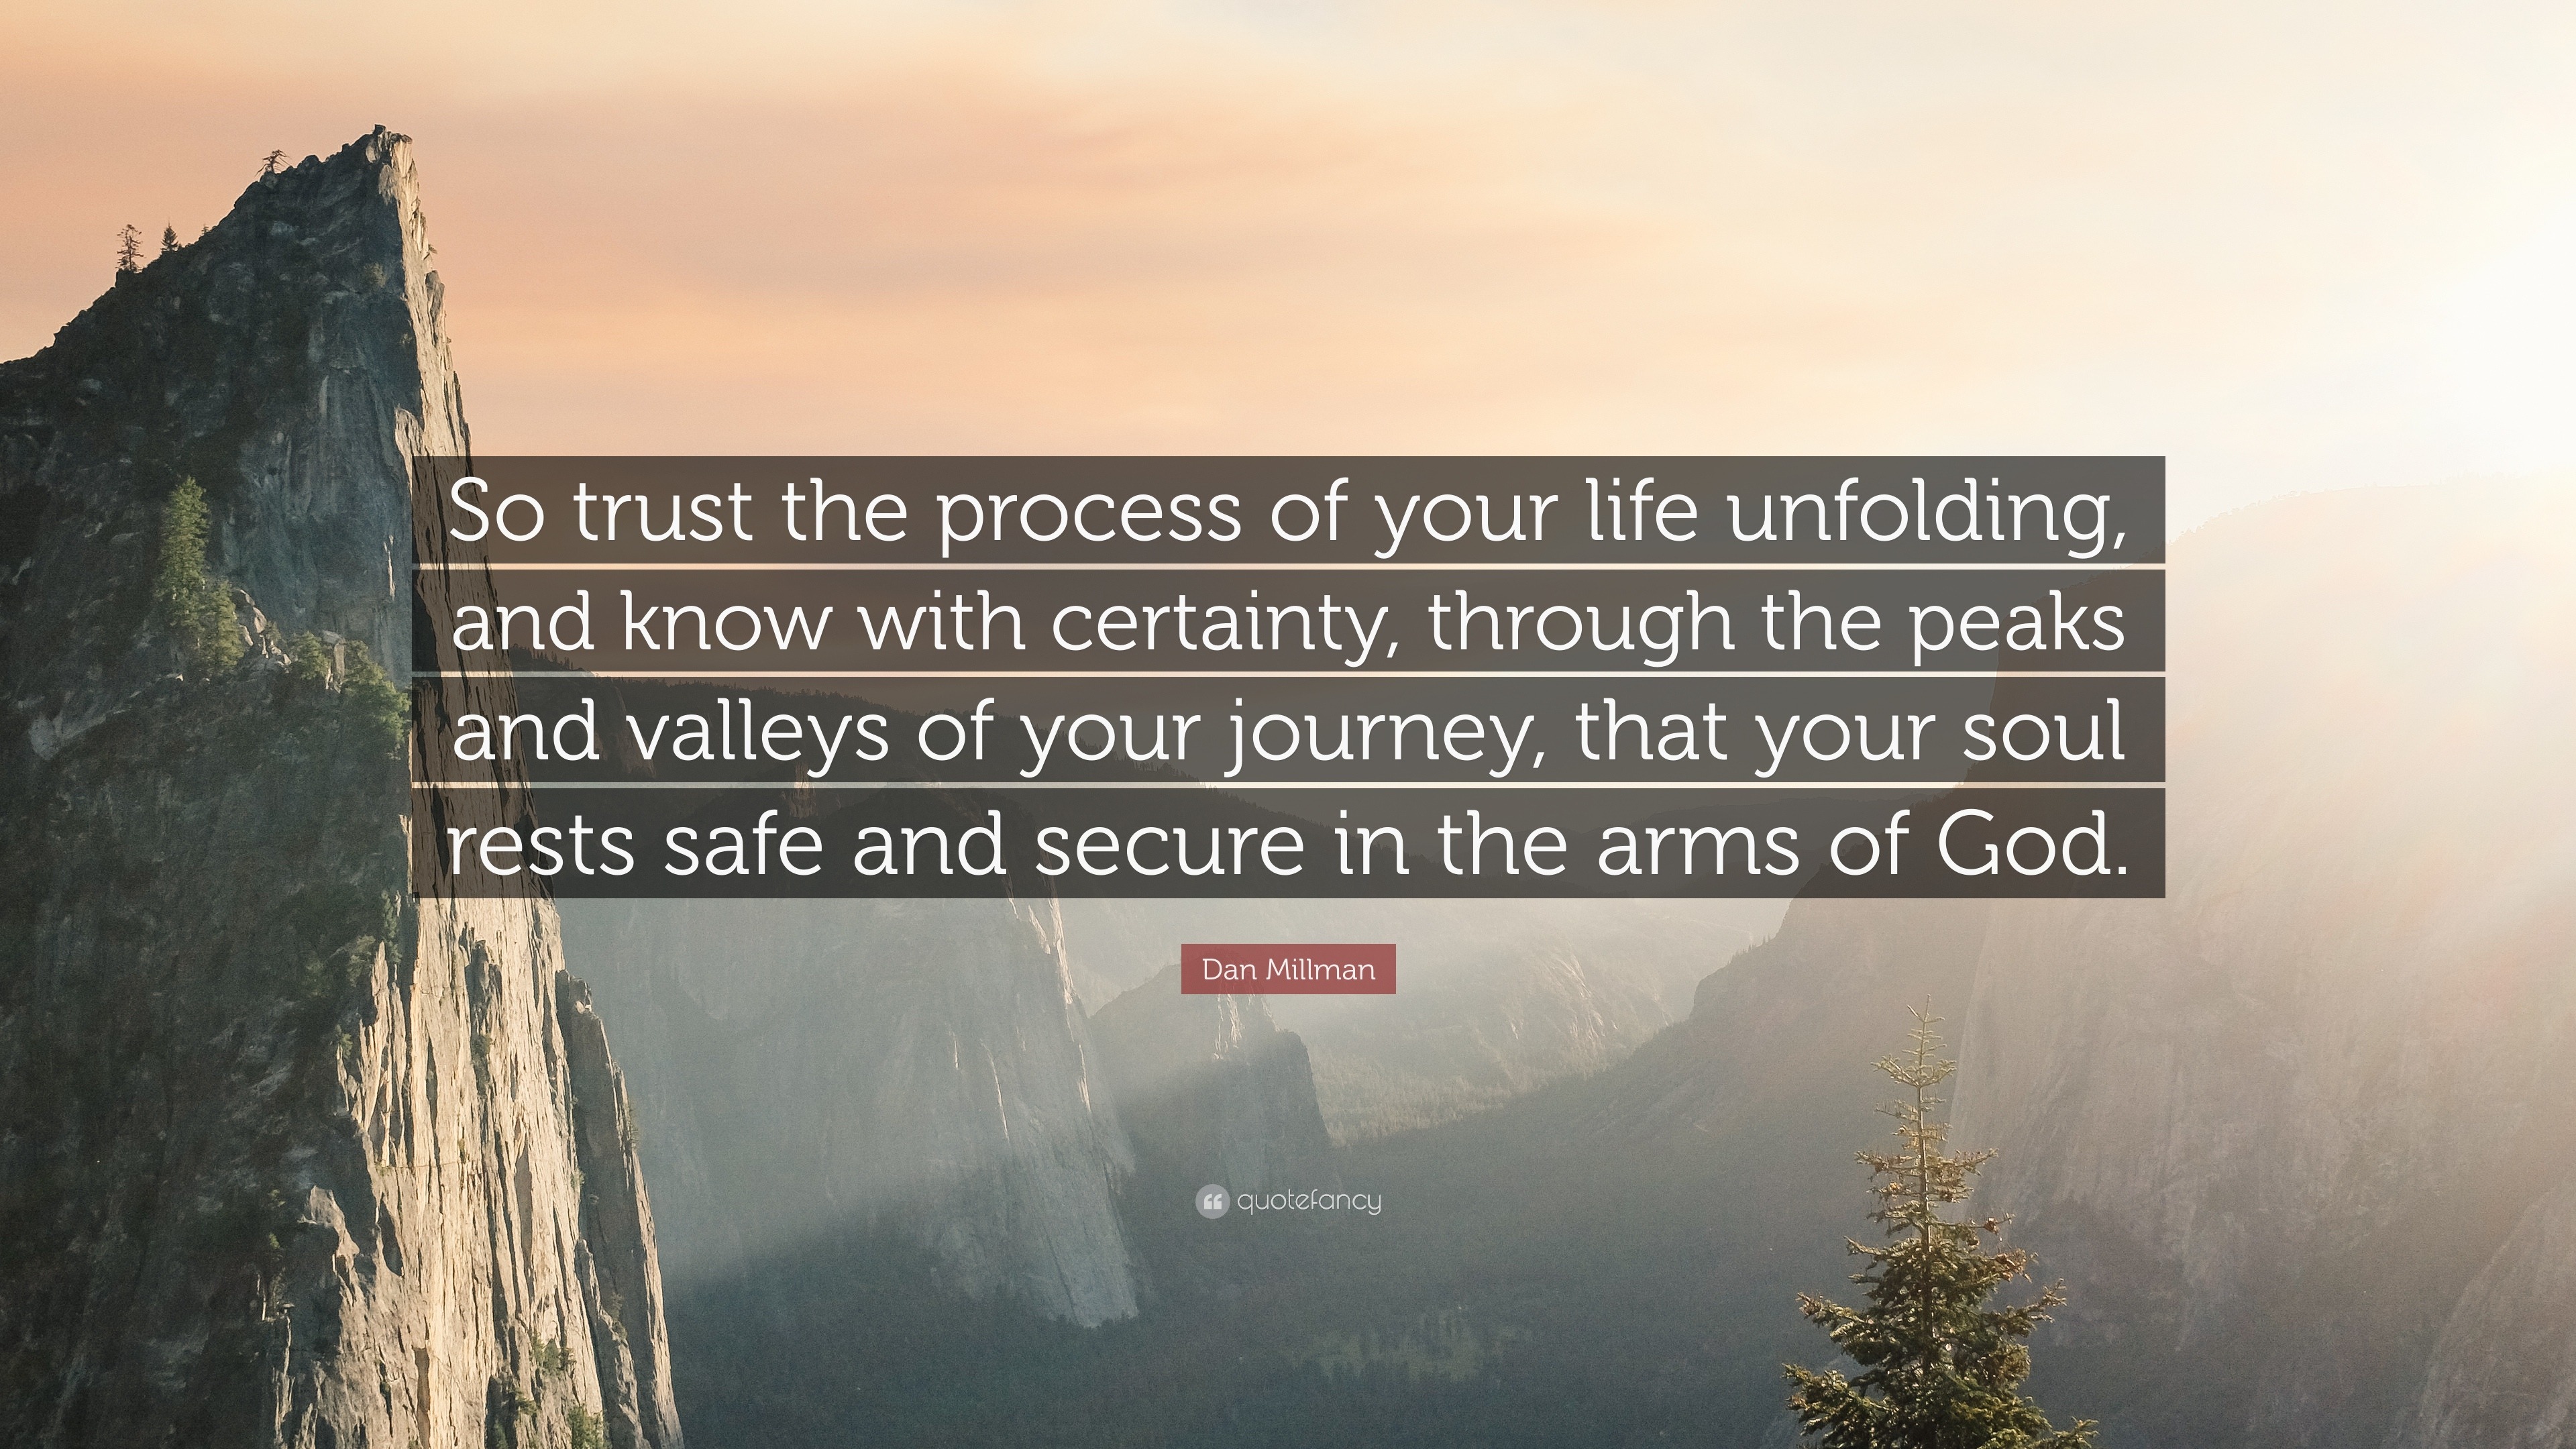 Dan Millman Quote “So trust the process of your life